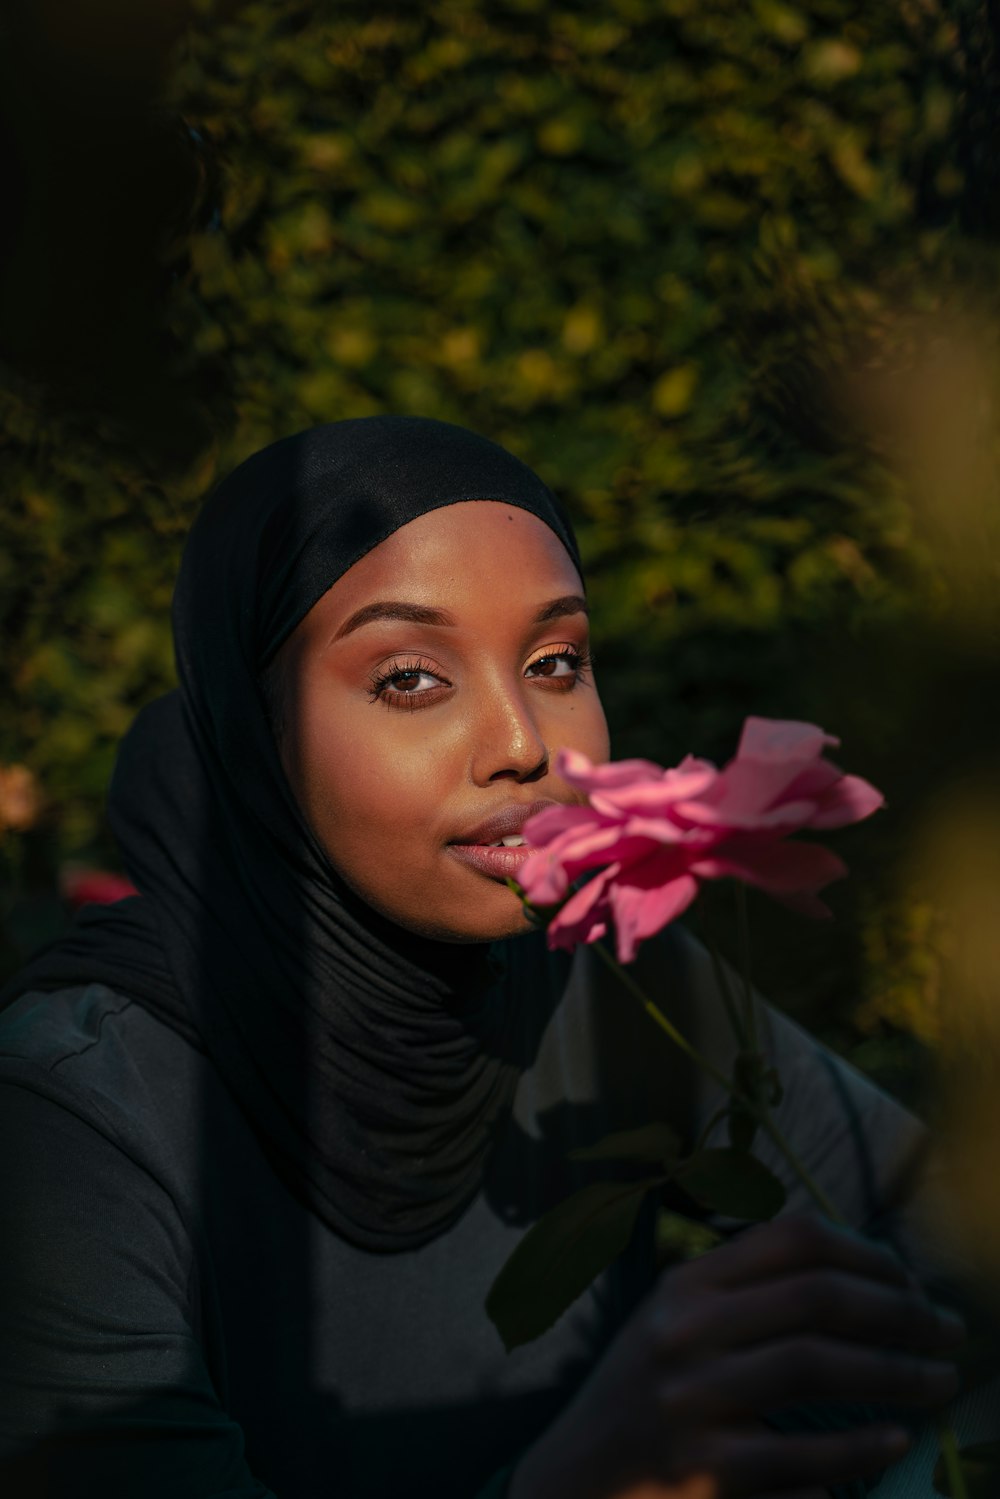 woman in black hijab holding pink flower